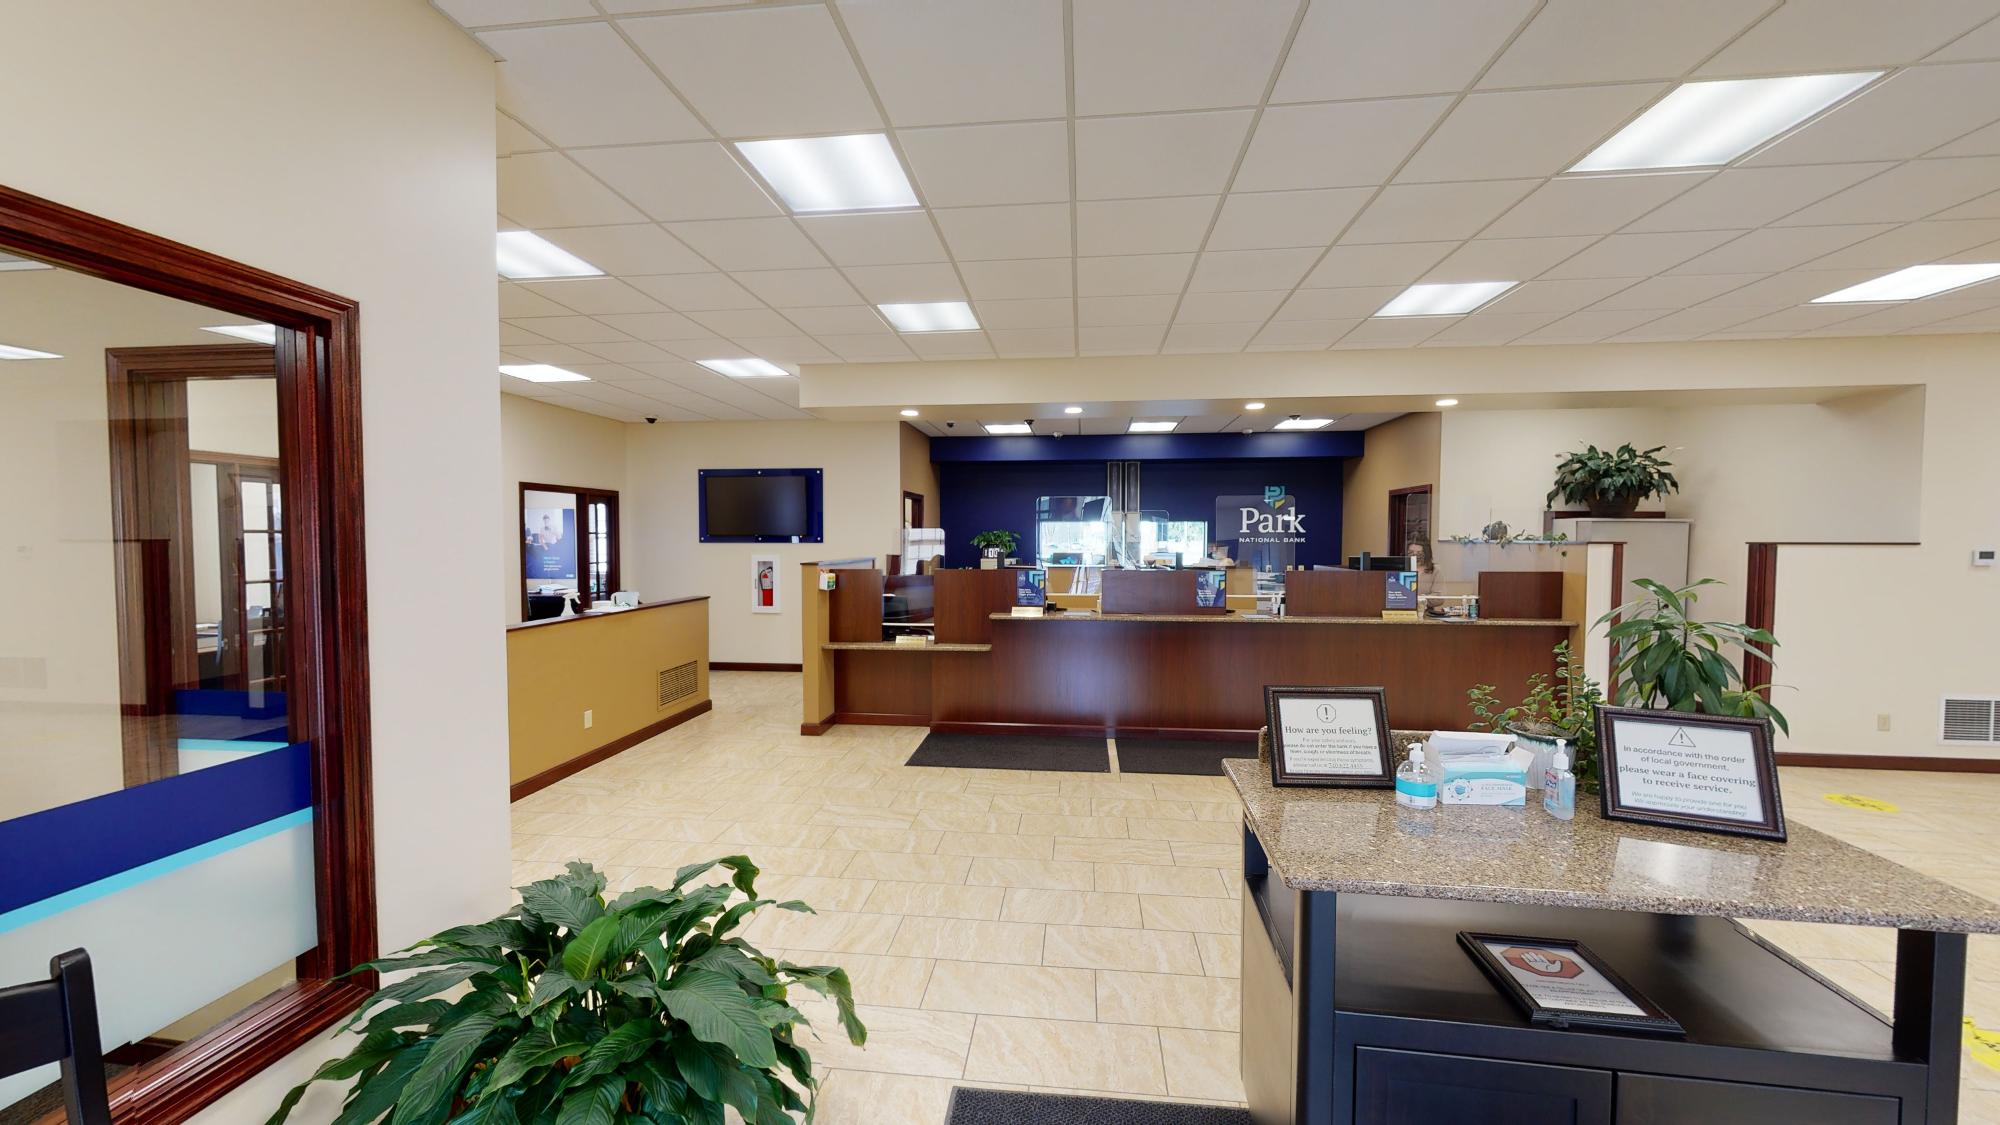 Park National Bank: Coshocton Office